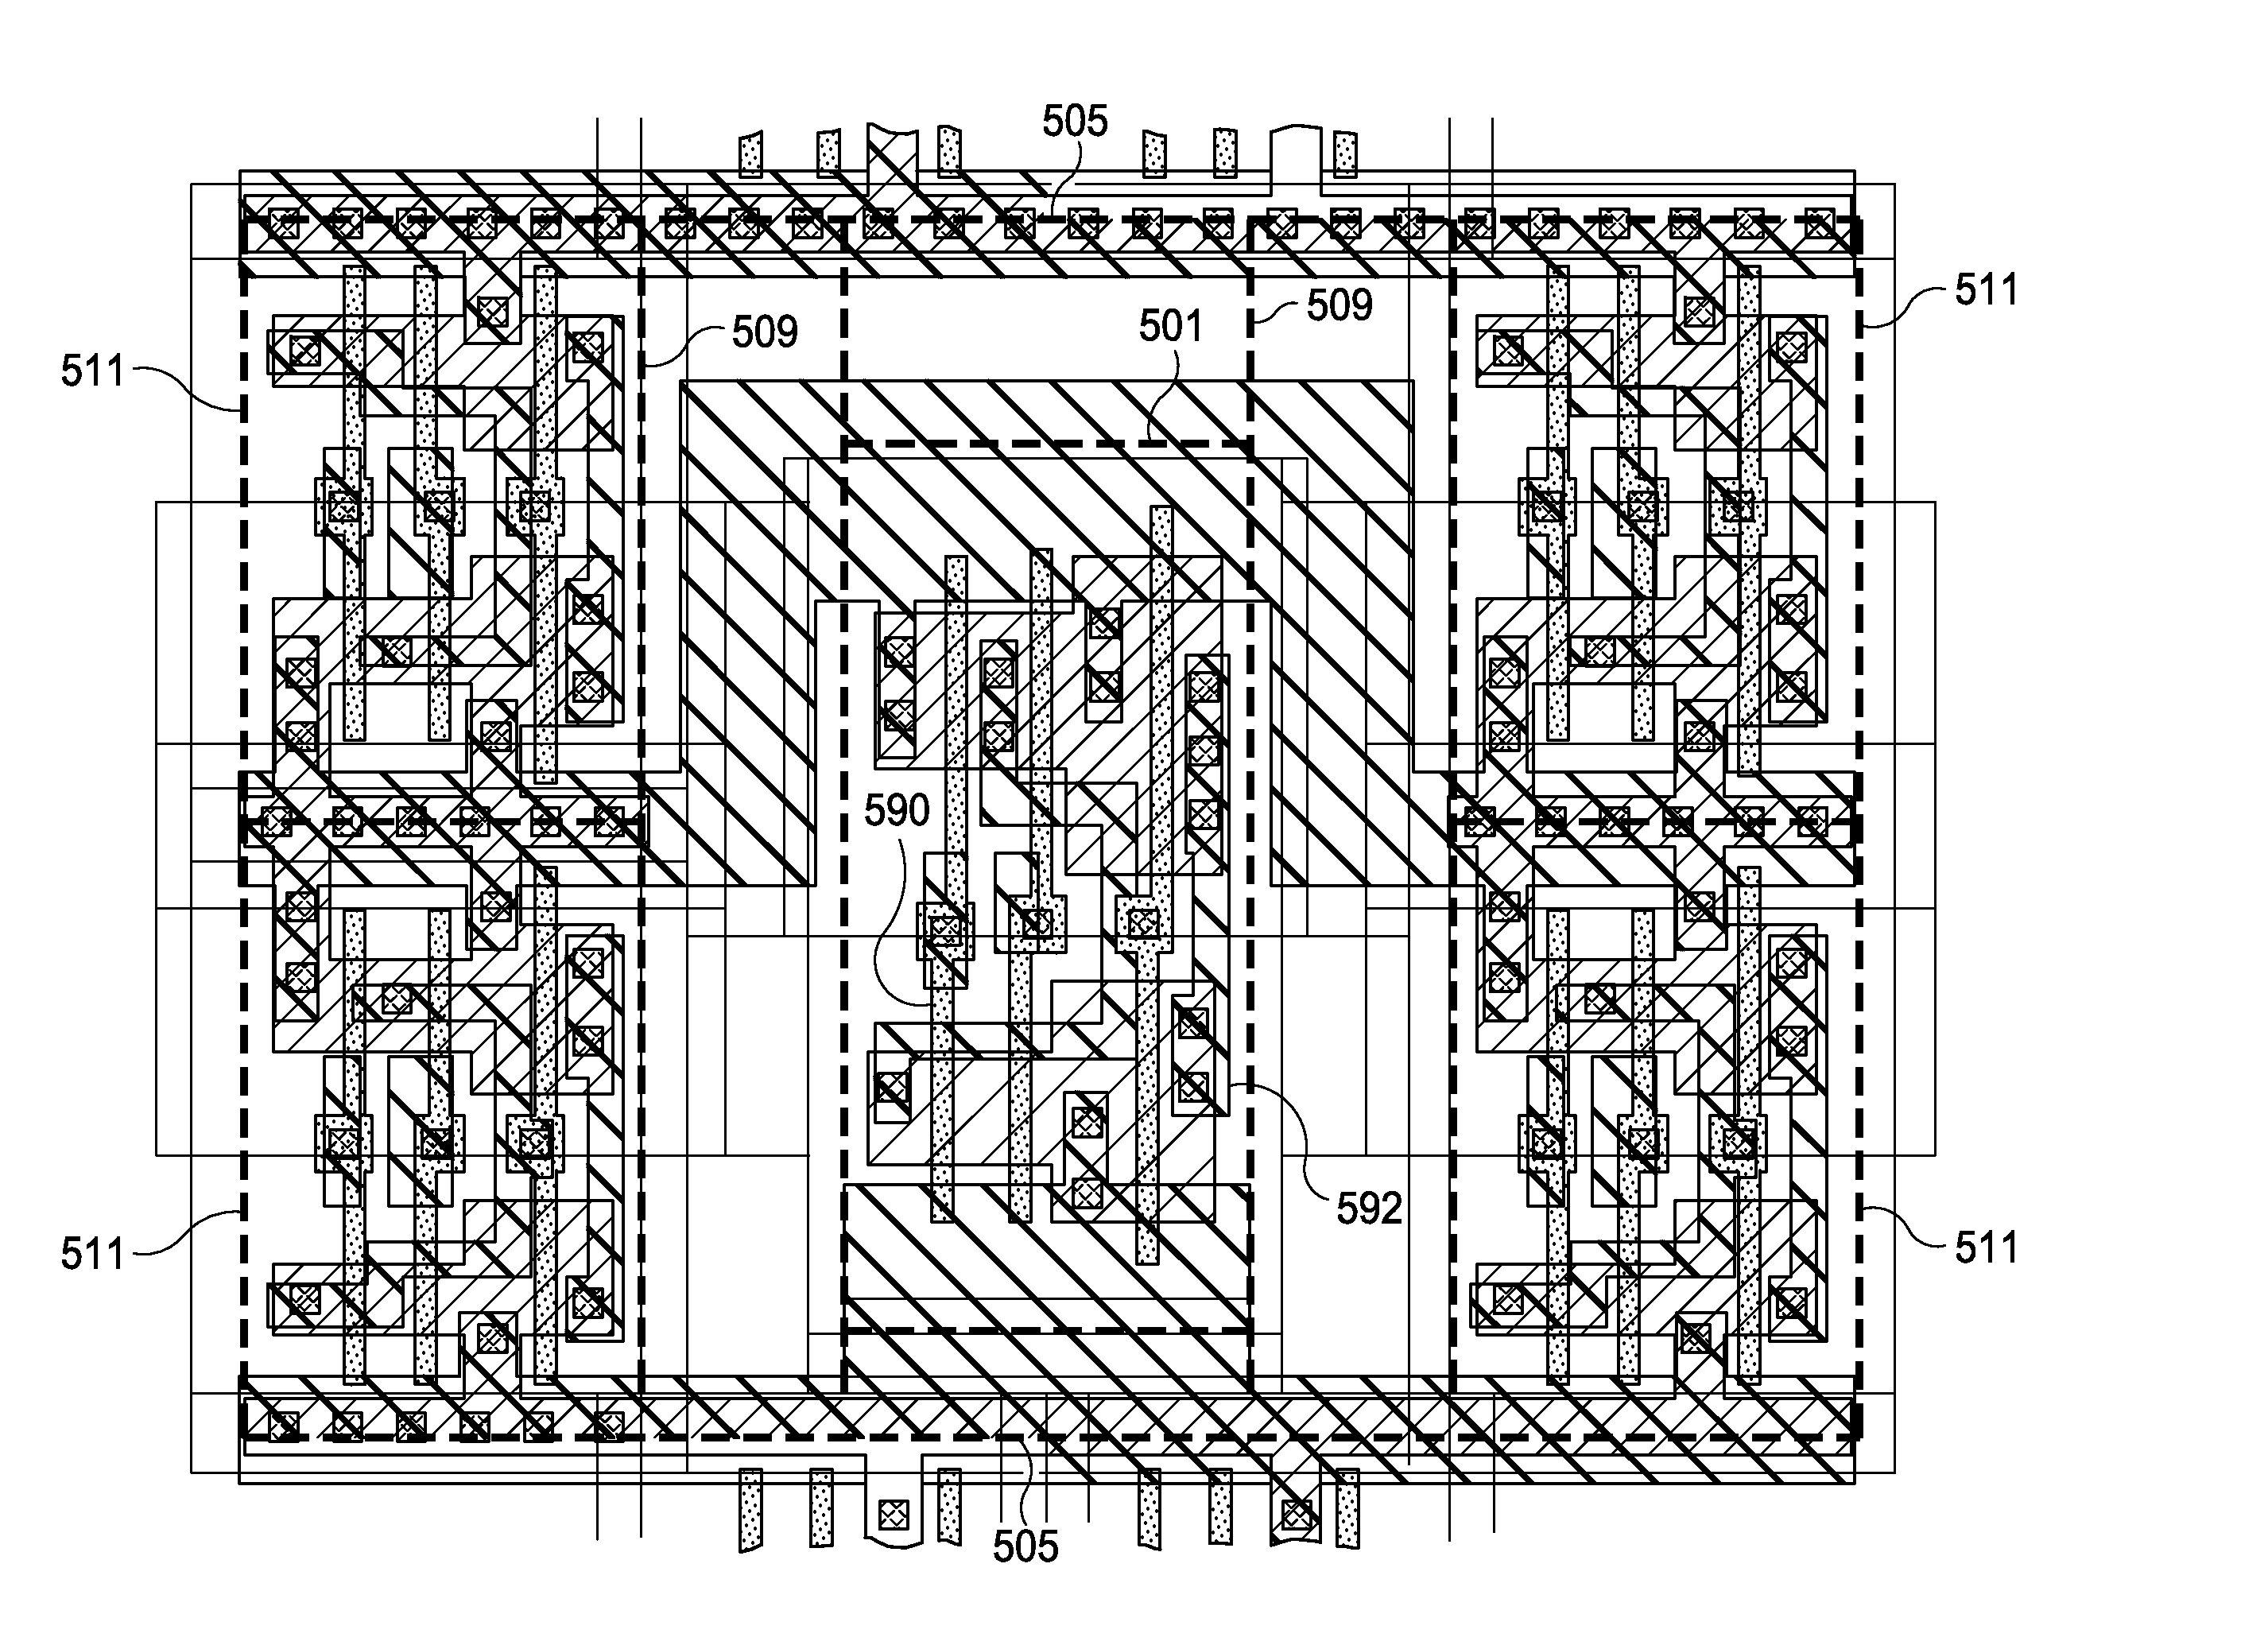 System and Method for Designing Cell Rows